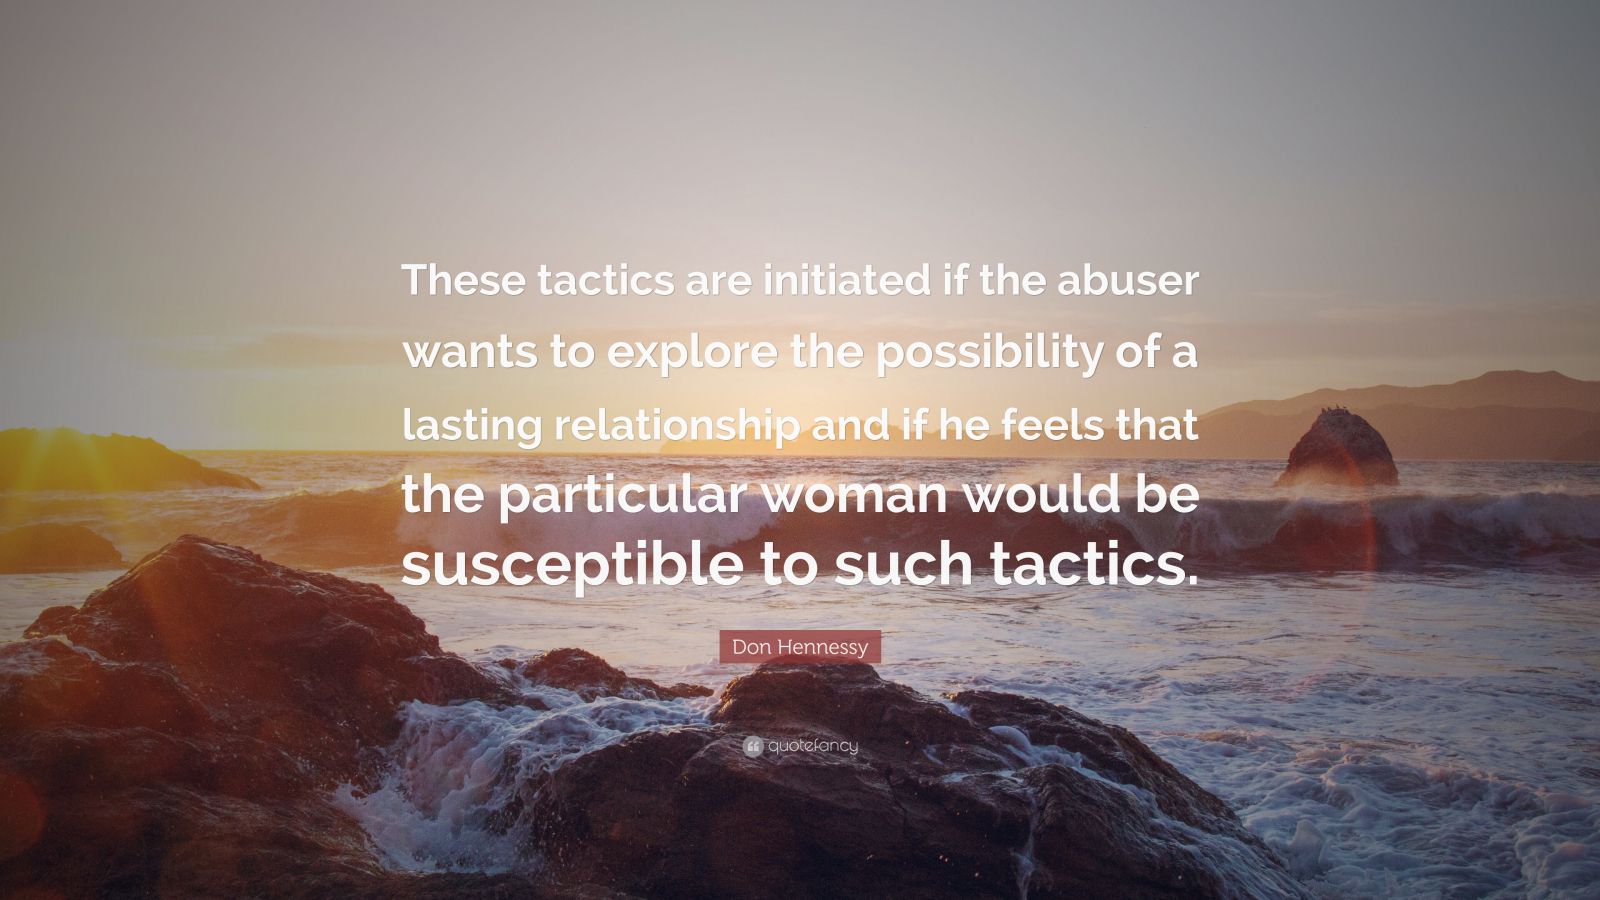 Don Hennessy Quote: “These tactics are initiated if the abuser wants to ...